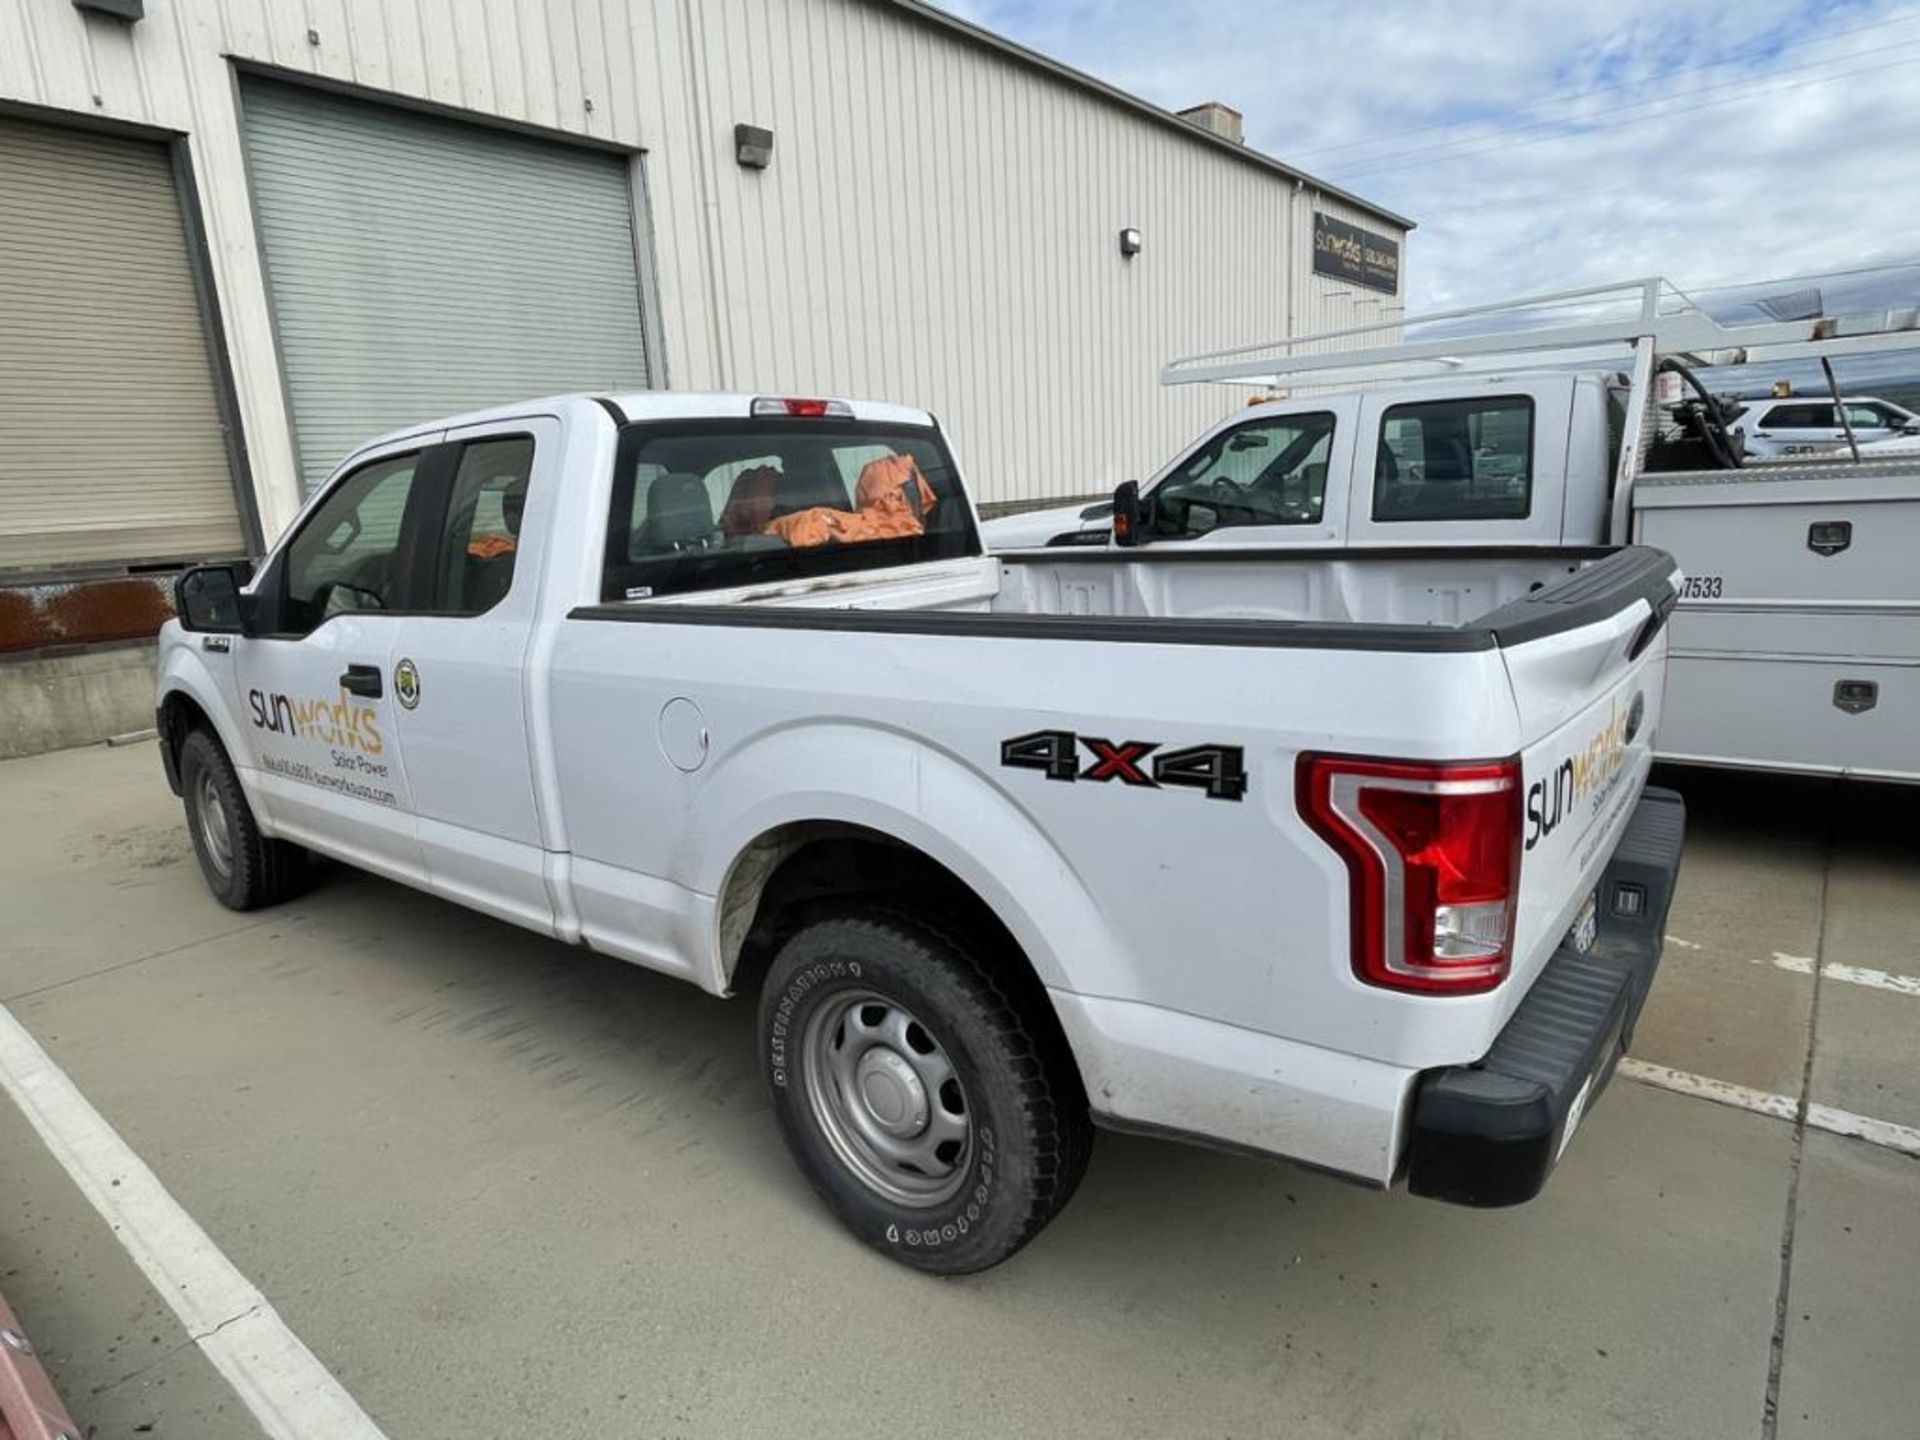 Ford F-150 XL Truck - Image 3 of 13